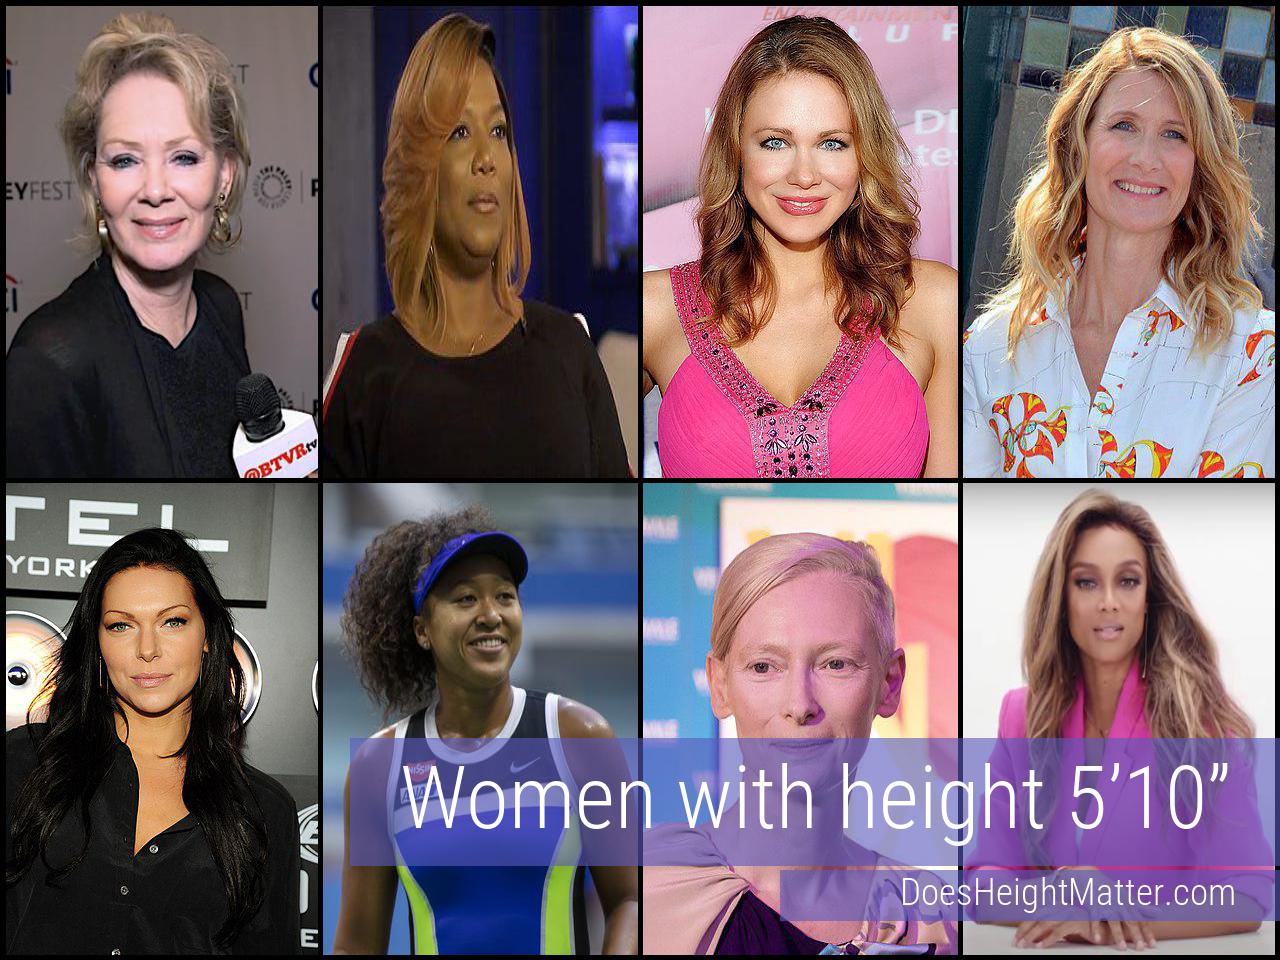 Female celebrities who are 5'10